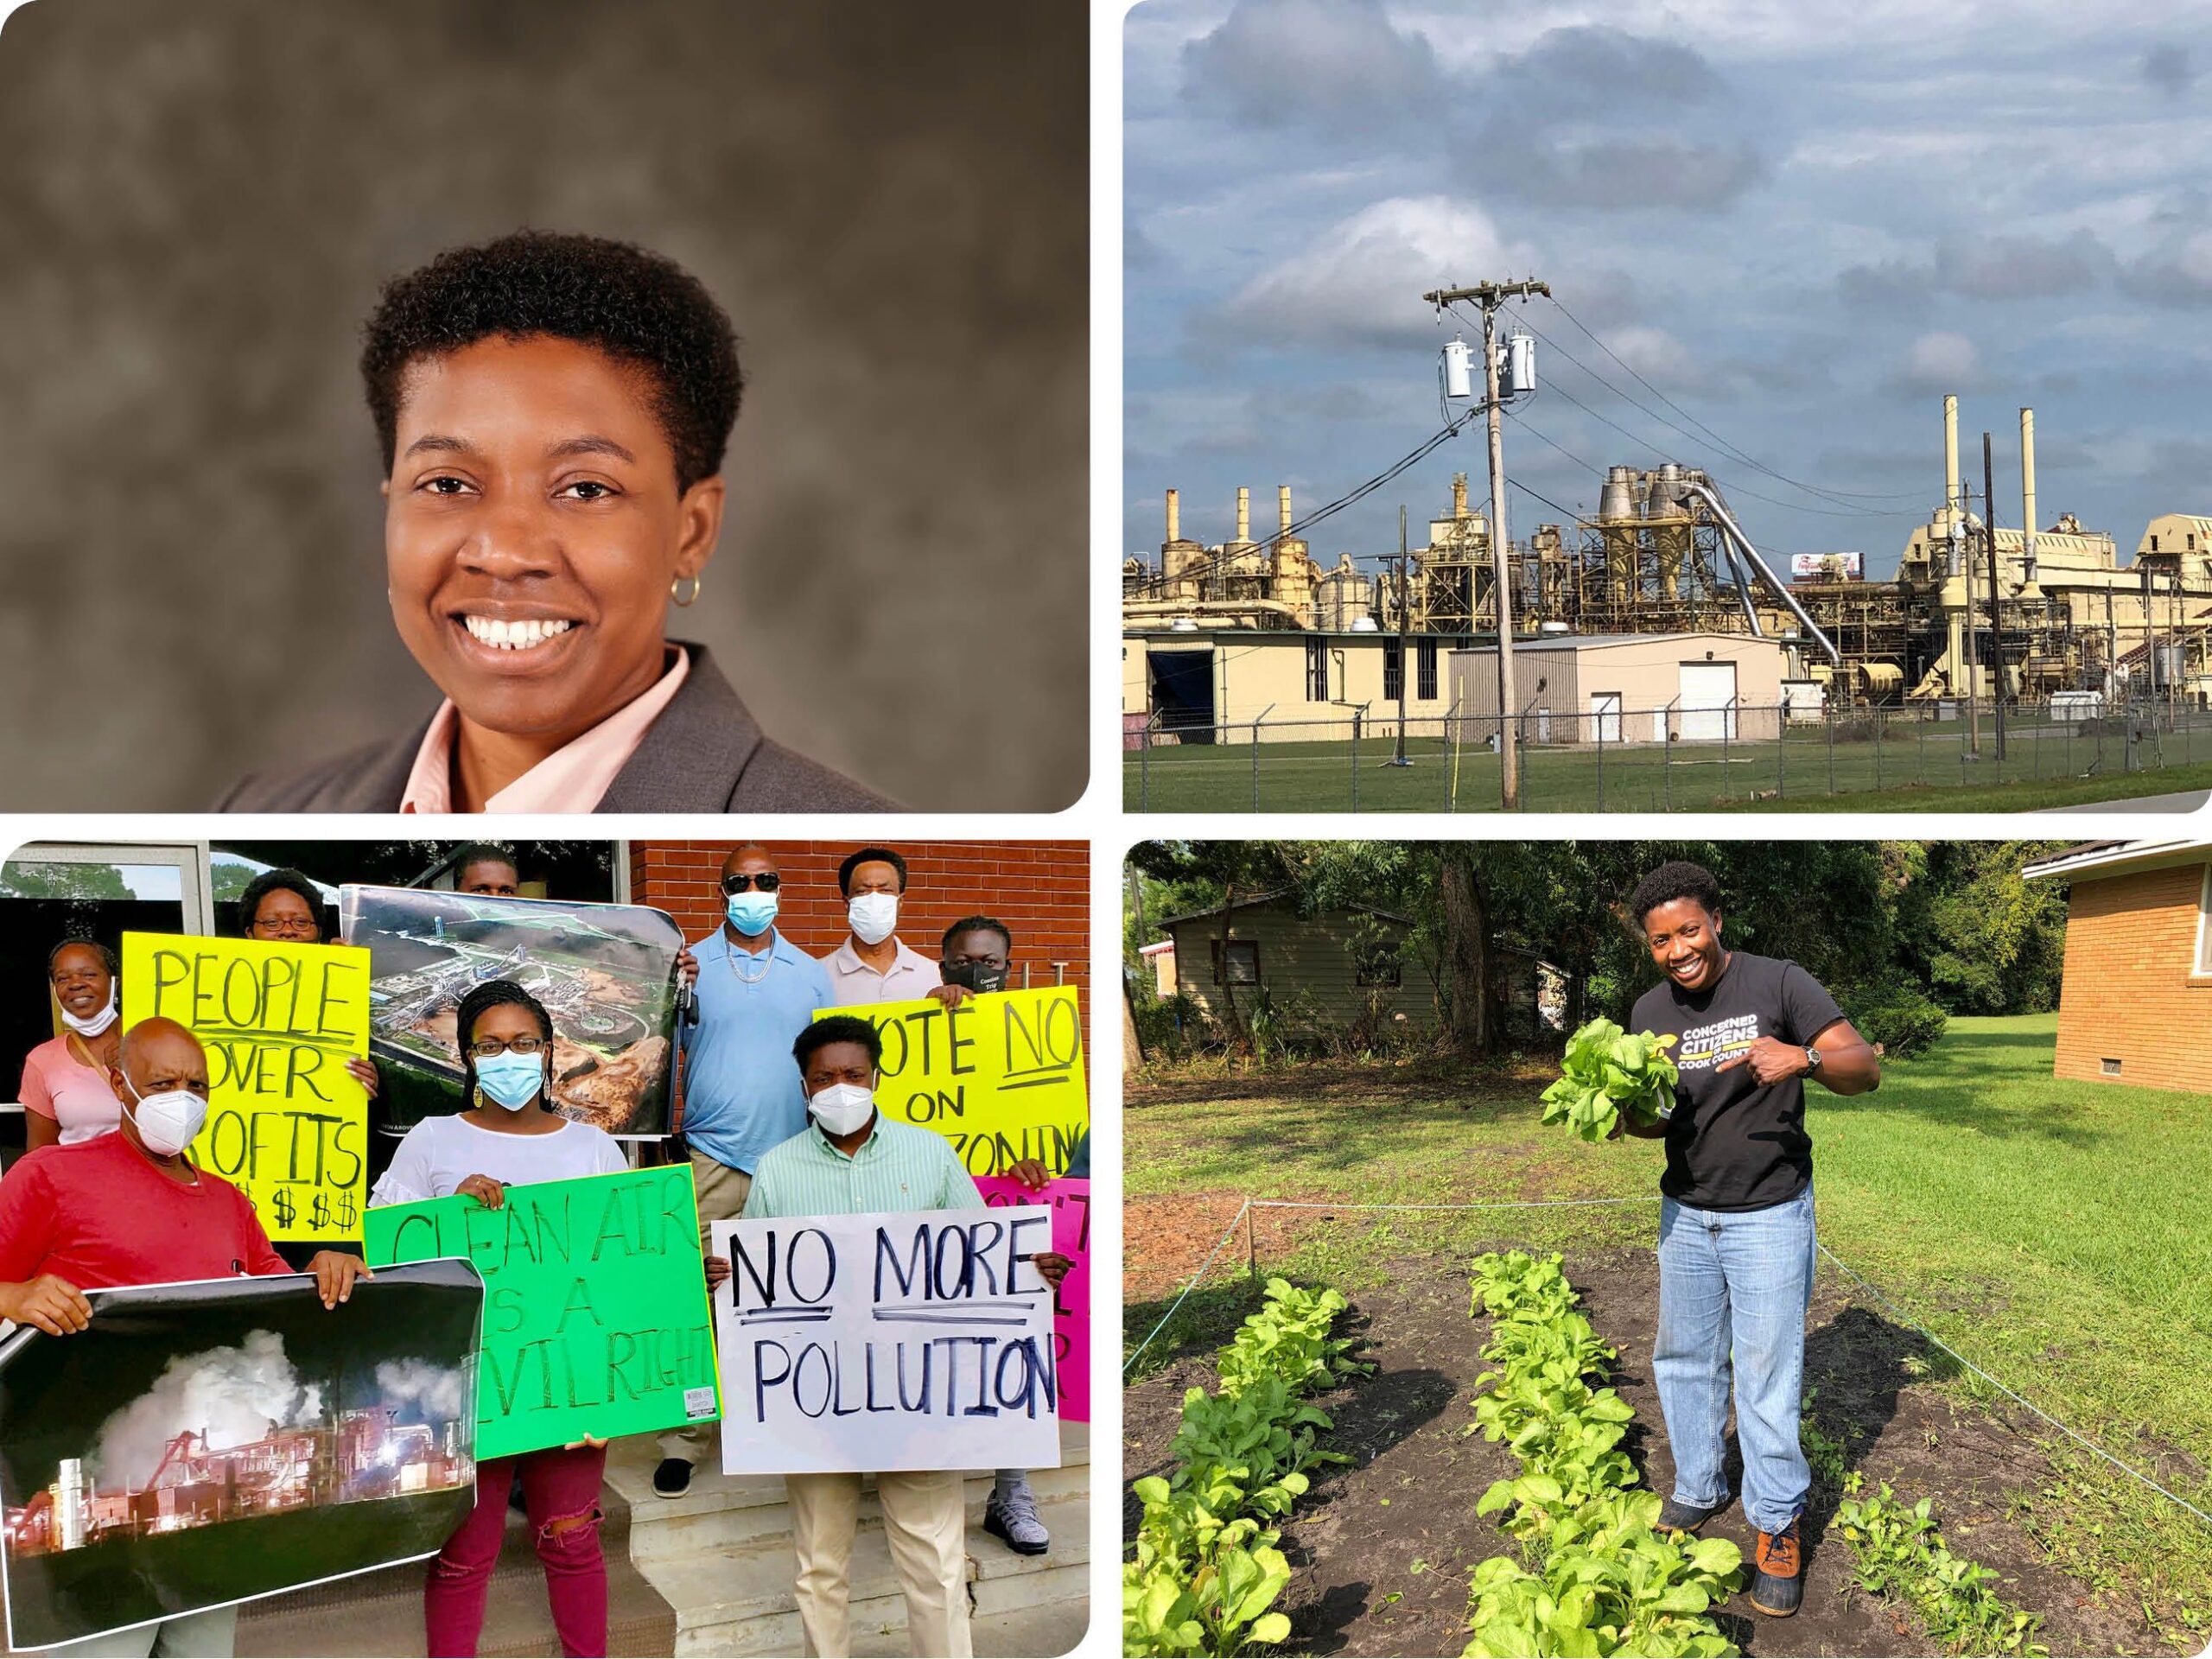 Sustaining change with Dr. Treva Gear, who's fighting for environmental justice in Adel